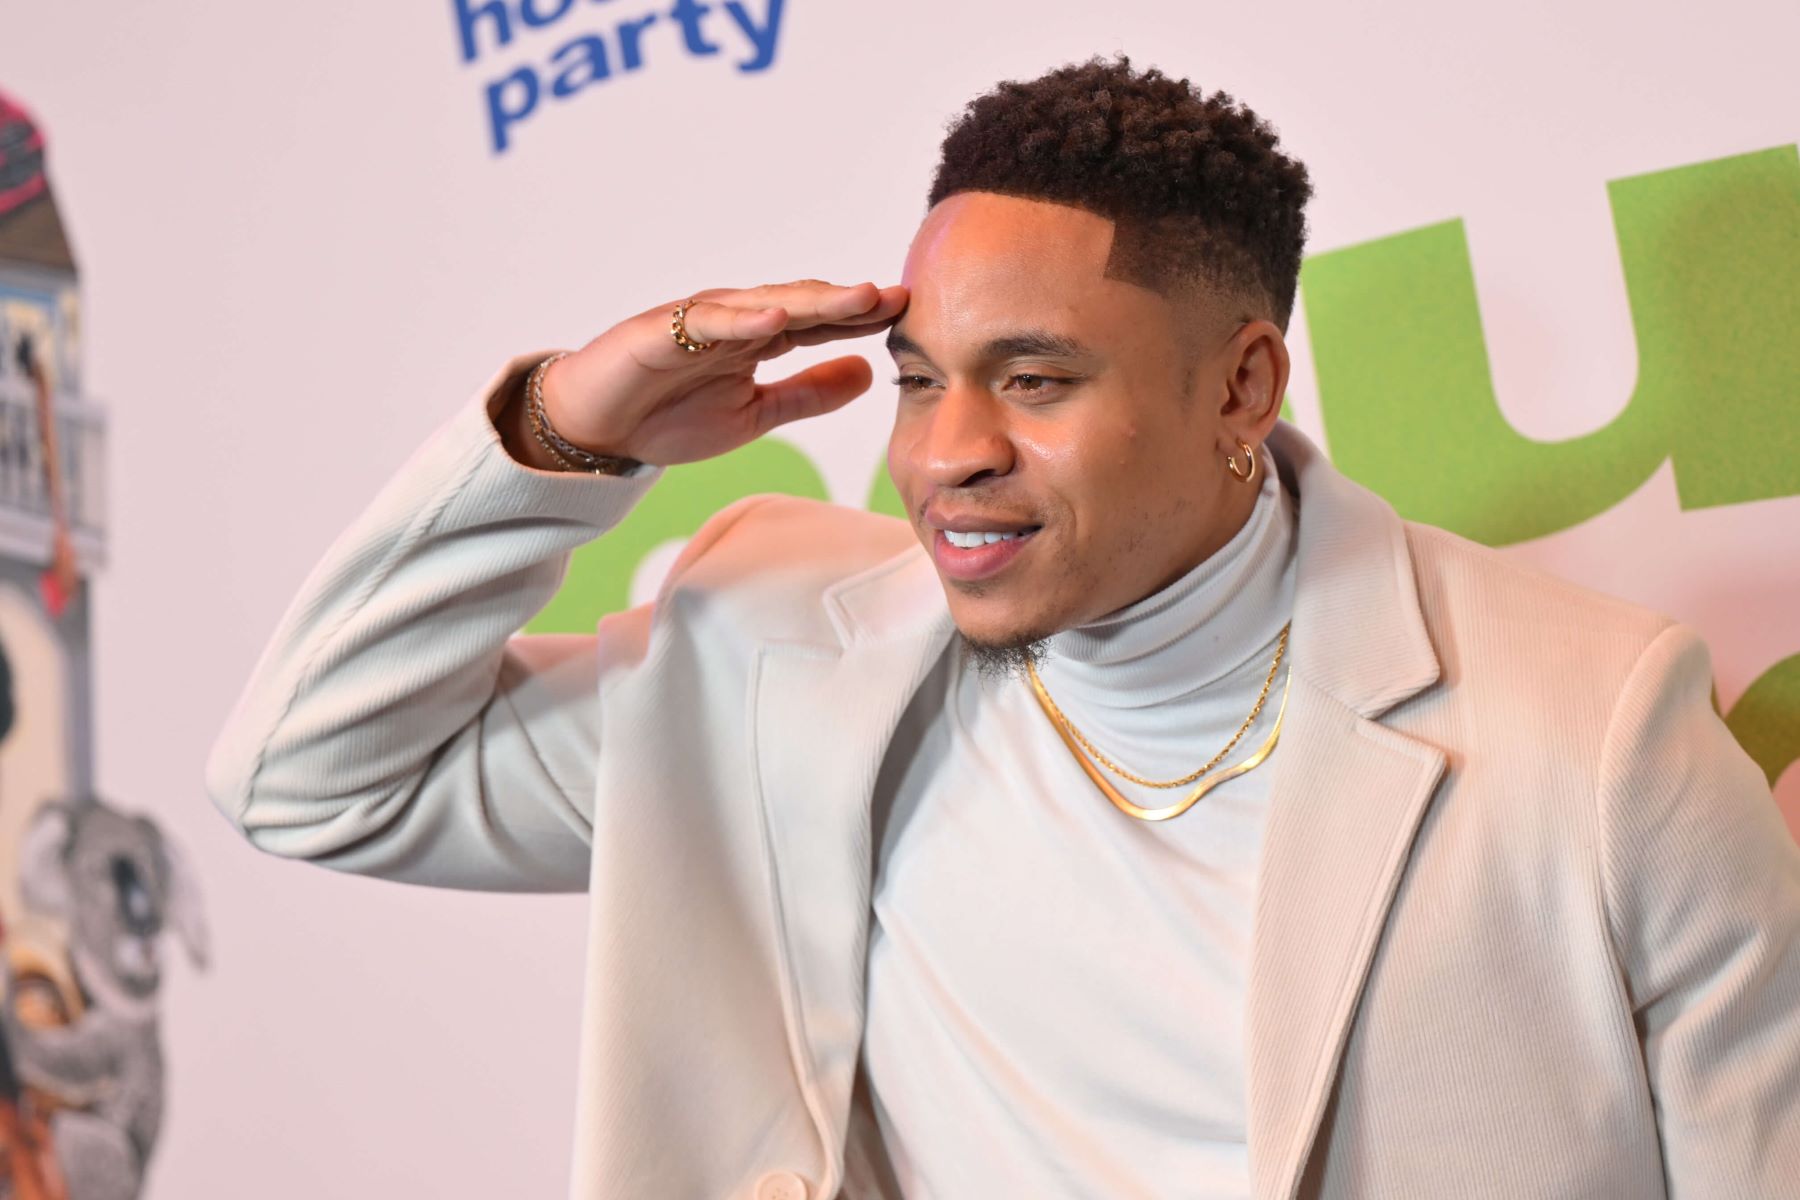 Rotimi, who stars as Charles in 'Will Trent' on ABC, wears a white suit coat over a white turtleneck and gold chain necklace.